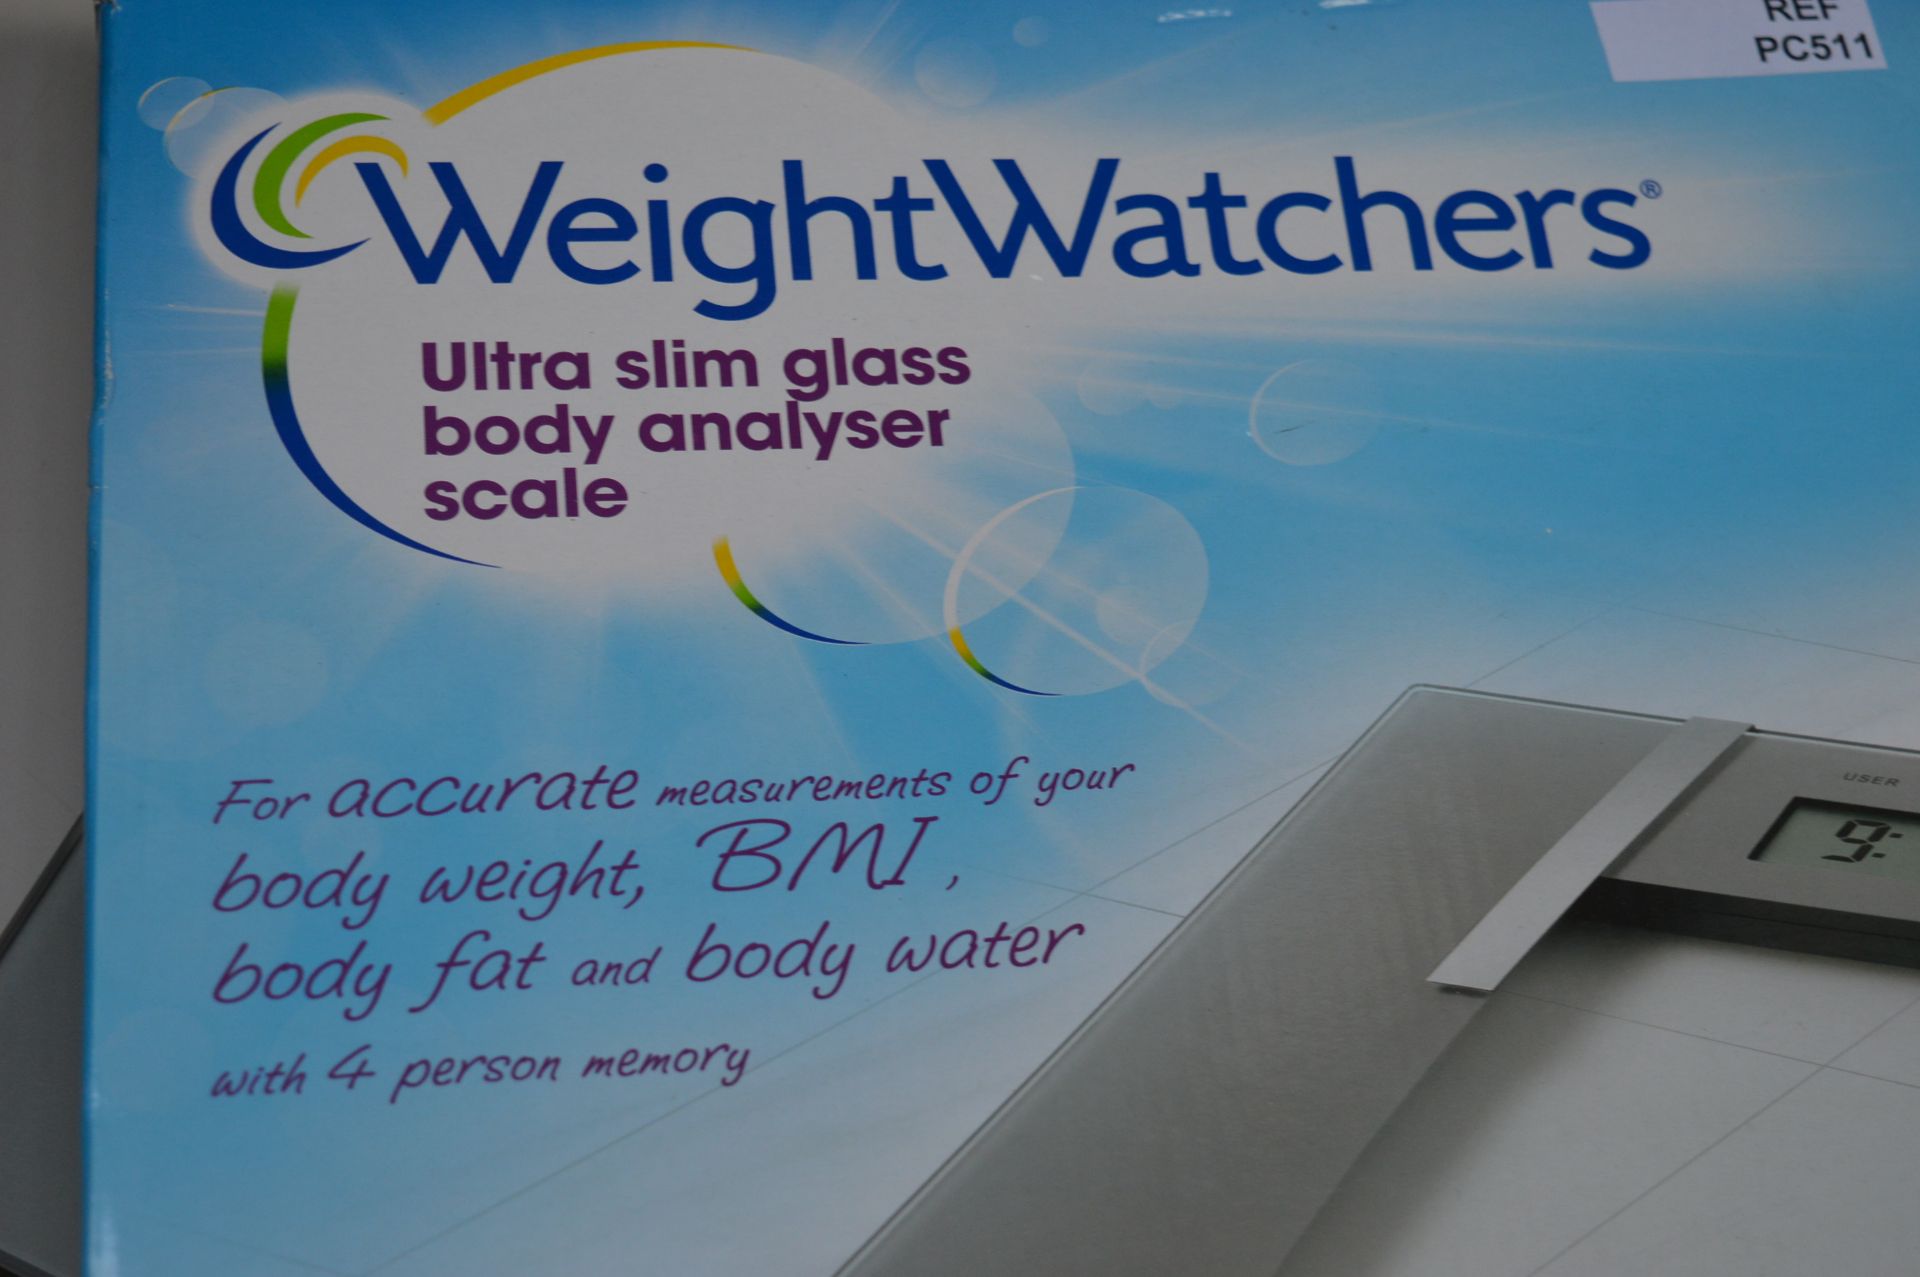 1 x Weight Watchers Ultra Slim Glass Body Analyser Scales - Measures Body Weight, Body Water, BMI - Image 4 of 6